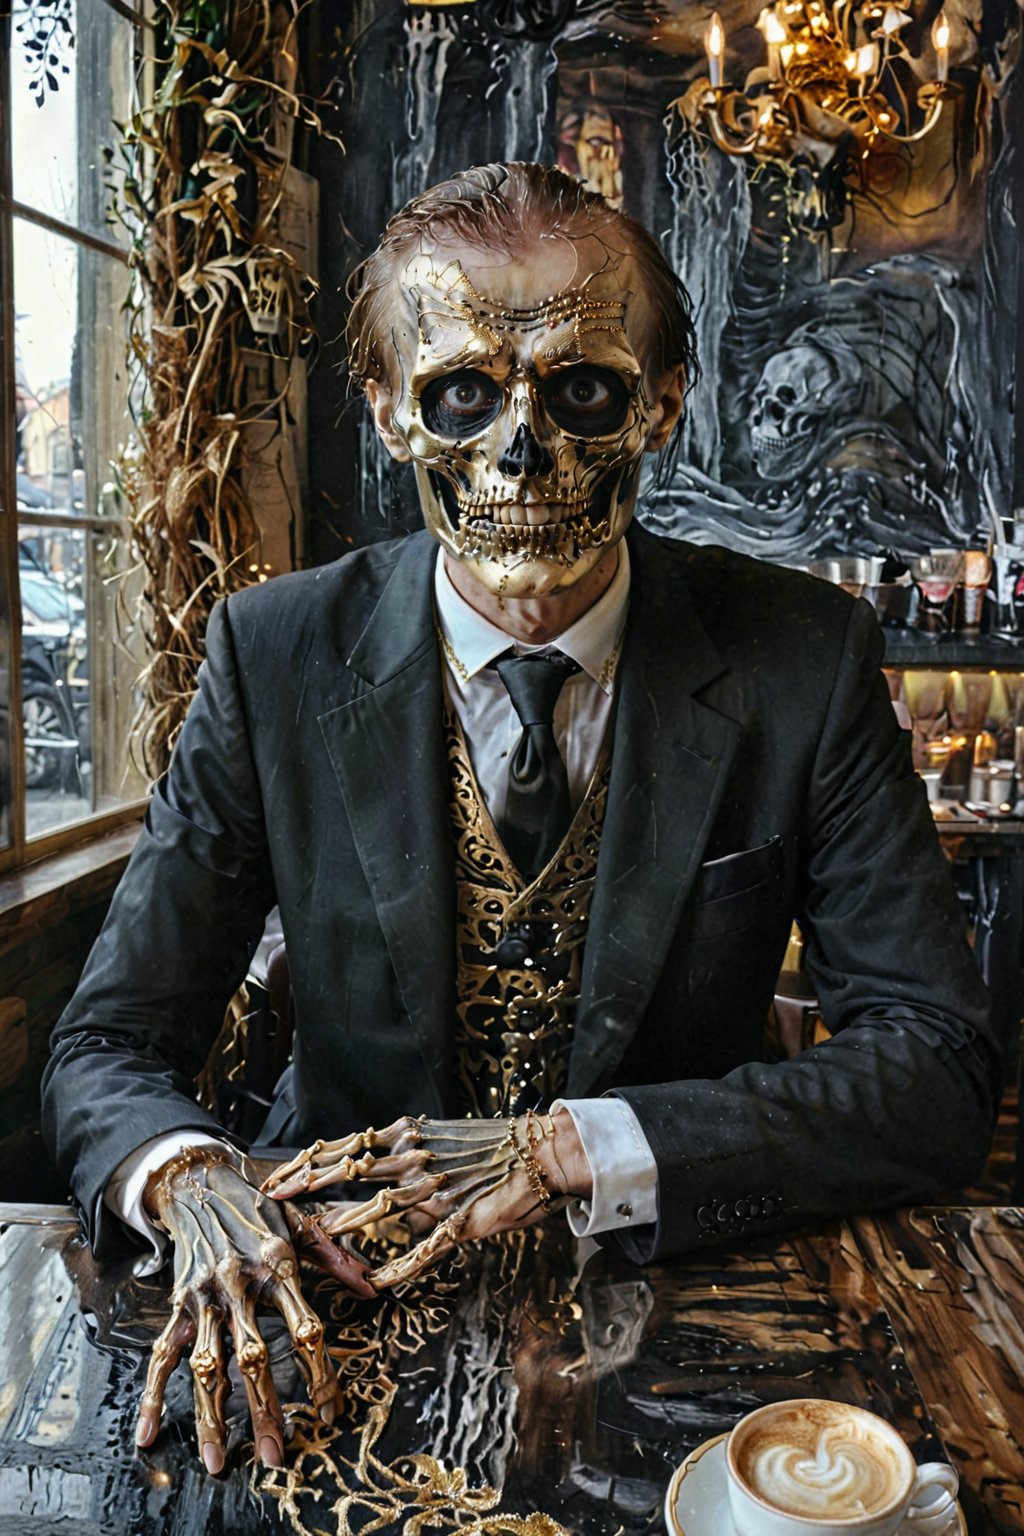  Death, the grim reaper as a creepy business man in black luxurious suit, skeleton face, black hole eyes, gold embroidered tie, sitting in a small fancy cafe in a European city,  portrait, half body portrait, holding out his hand to shake, eerie, cinematic, moody lights,style of Edvard Munch,Edvard Munch style